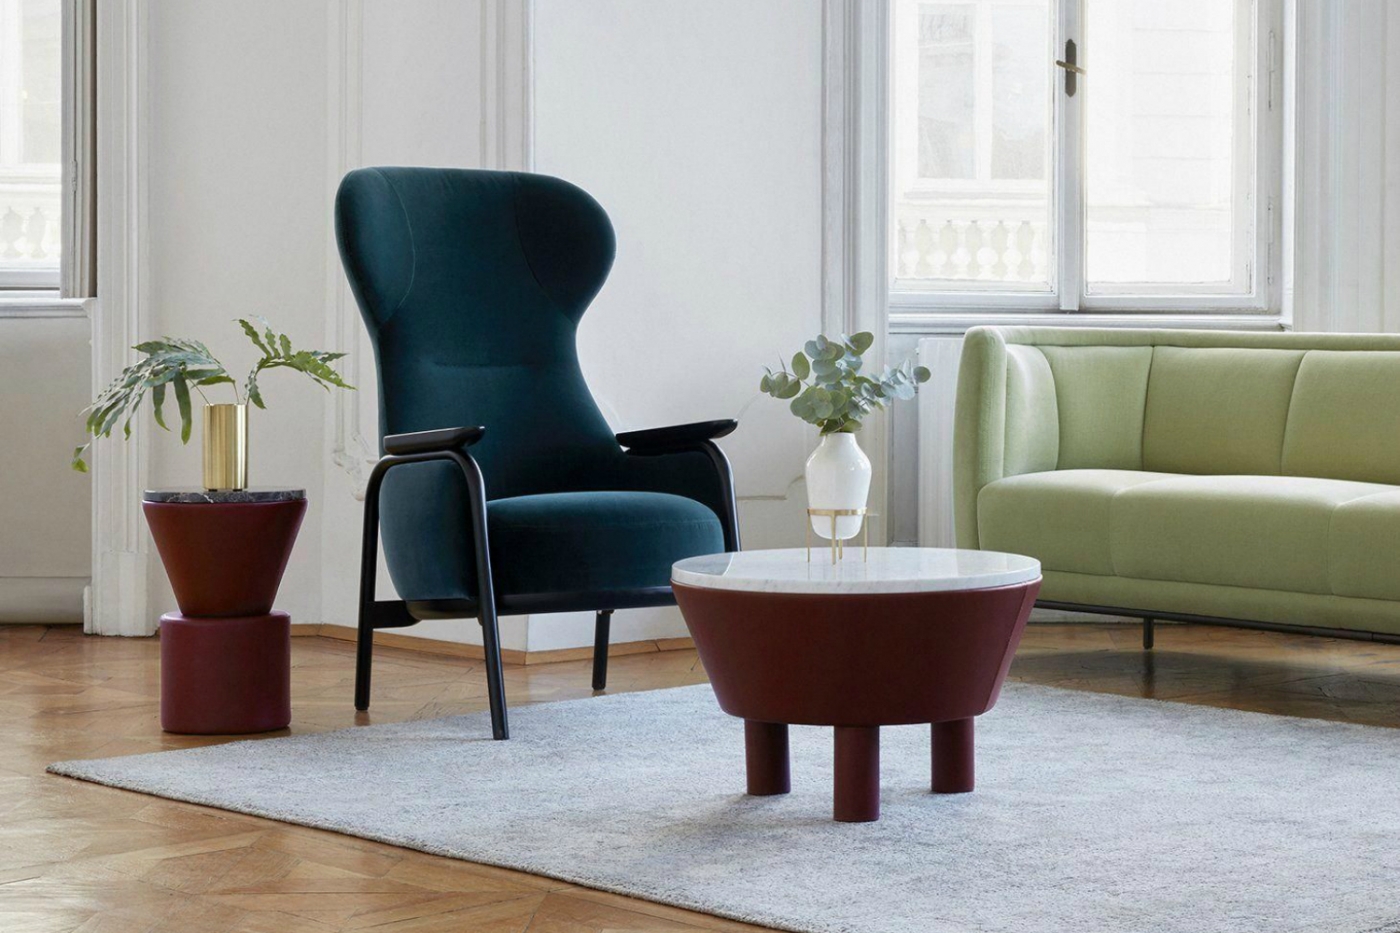 10 Modern Round Coffee Tables For Your, Round Coffee Table Living Room Design